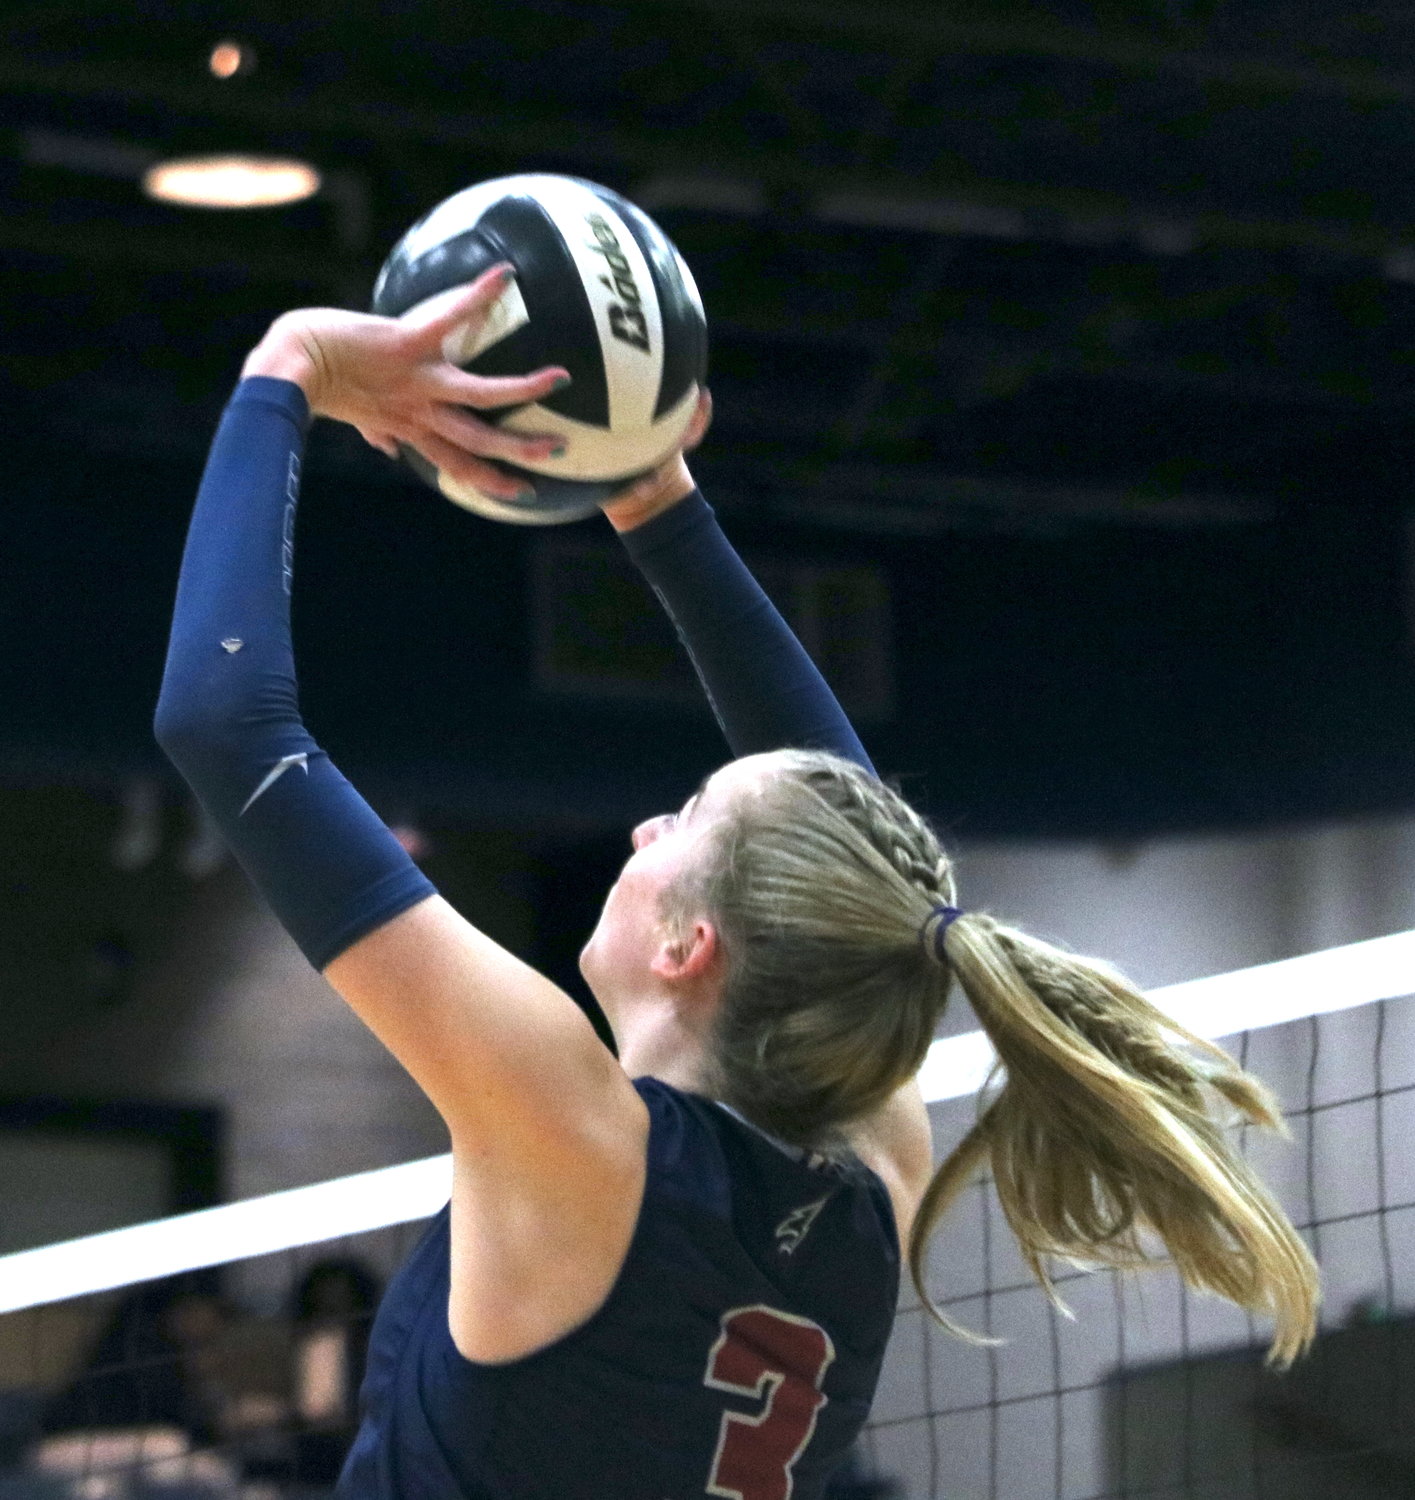 Presley Powell sets the ball during Tuesday's match between Tompkins and Ridge Point at Wheeler Field House.